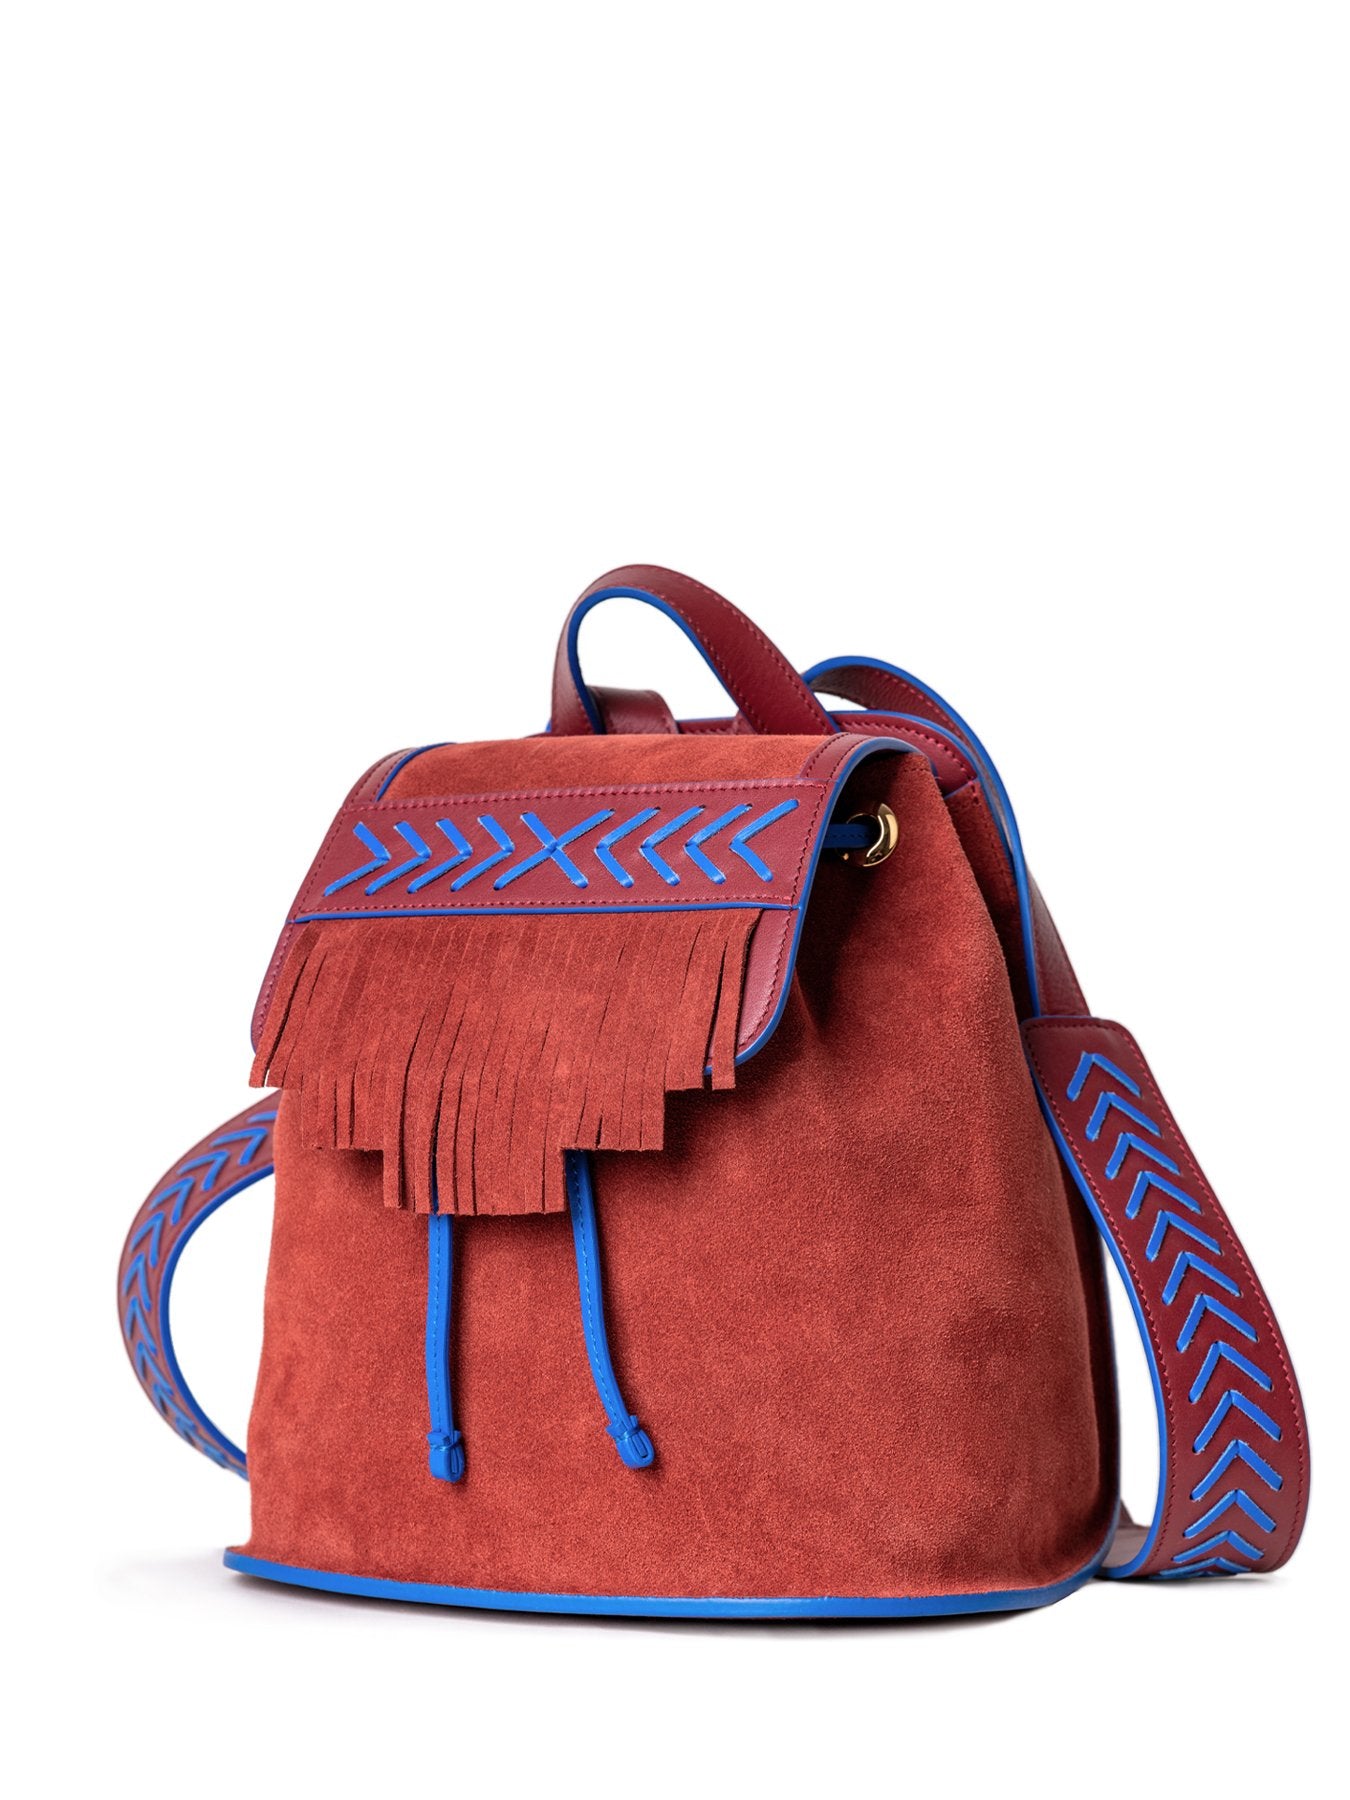 unique fashion backpack with fringed